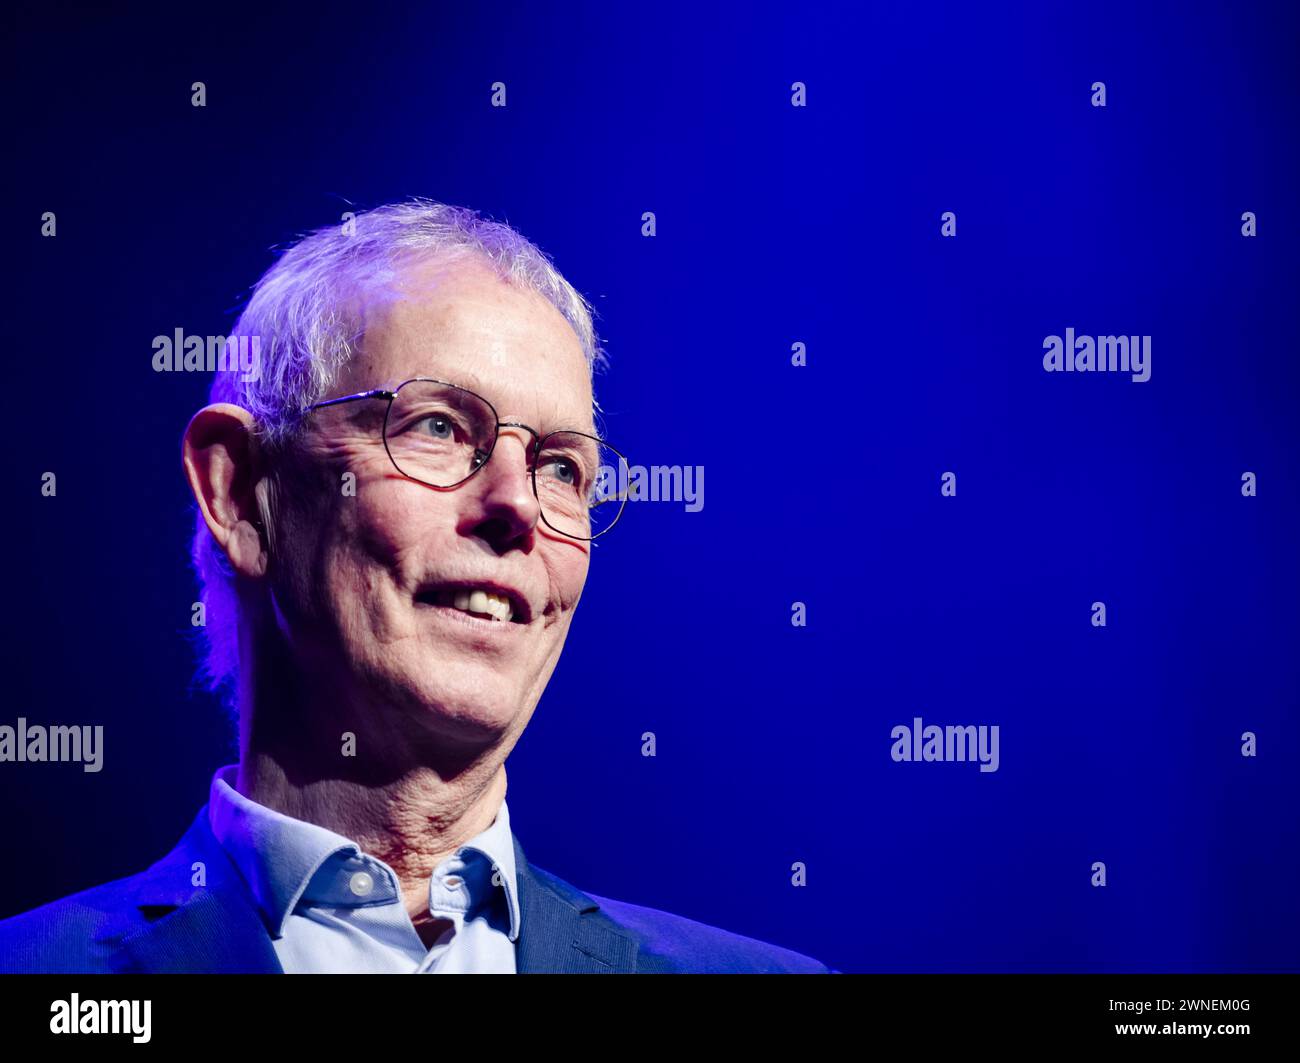 BUSSUM - Former senator Tiny Kox during his farewell at the SP party conference. Kox served in the Senate for more than twenty years and led the SP faction between 2003 and 2022. ANP SEM VAN DER WAL netherlands out - belgium out Credit: ANP/Alamy Live News Stock Photo